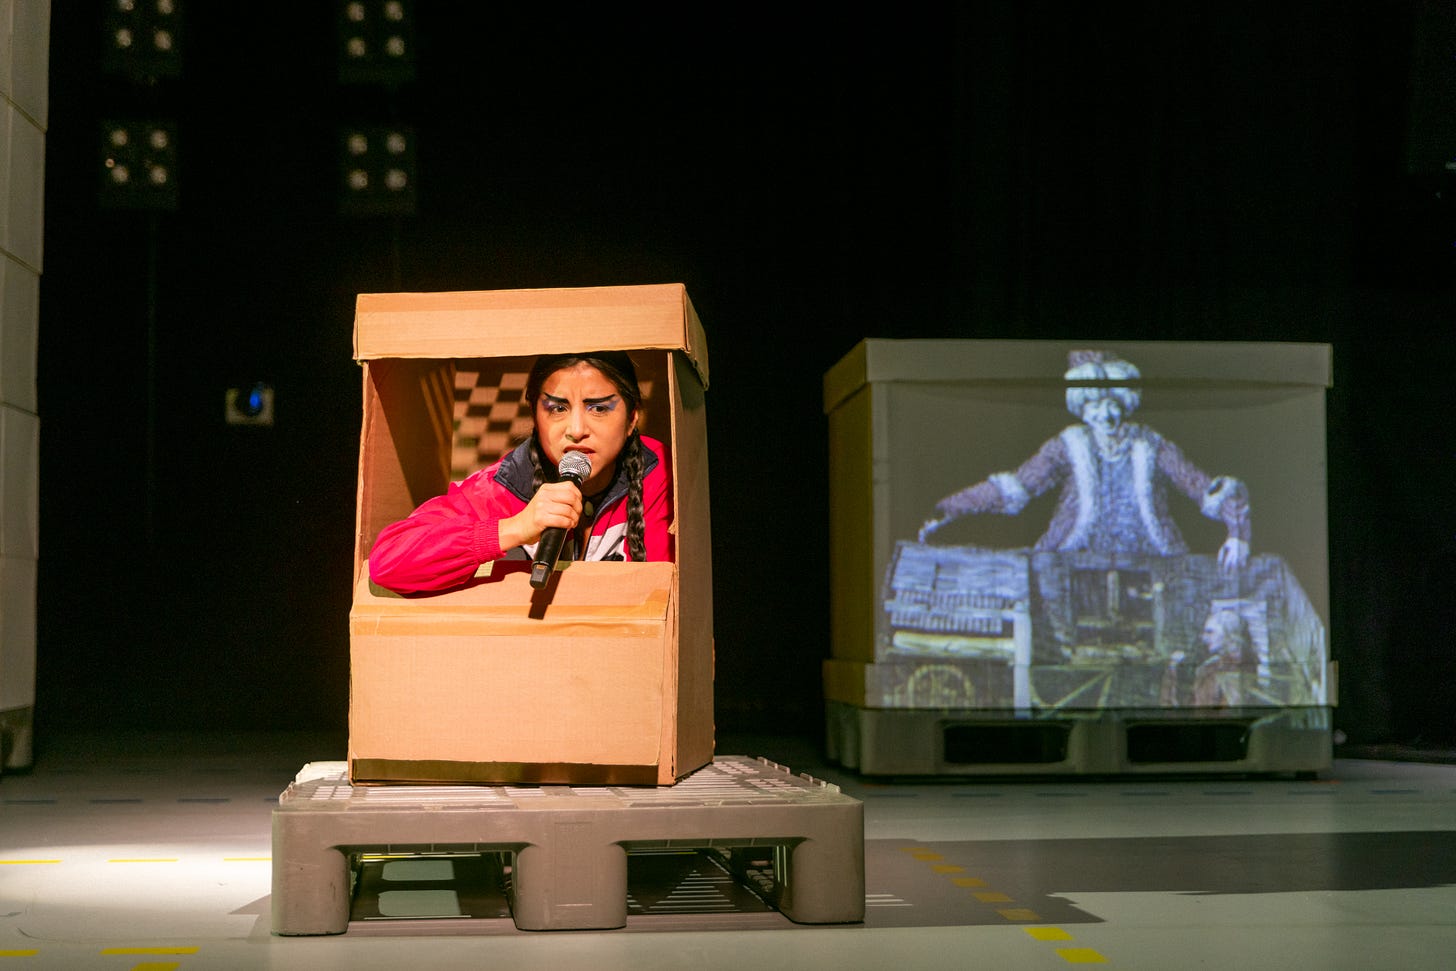 A circus performer sits inside a cardboard box holding a microphone.